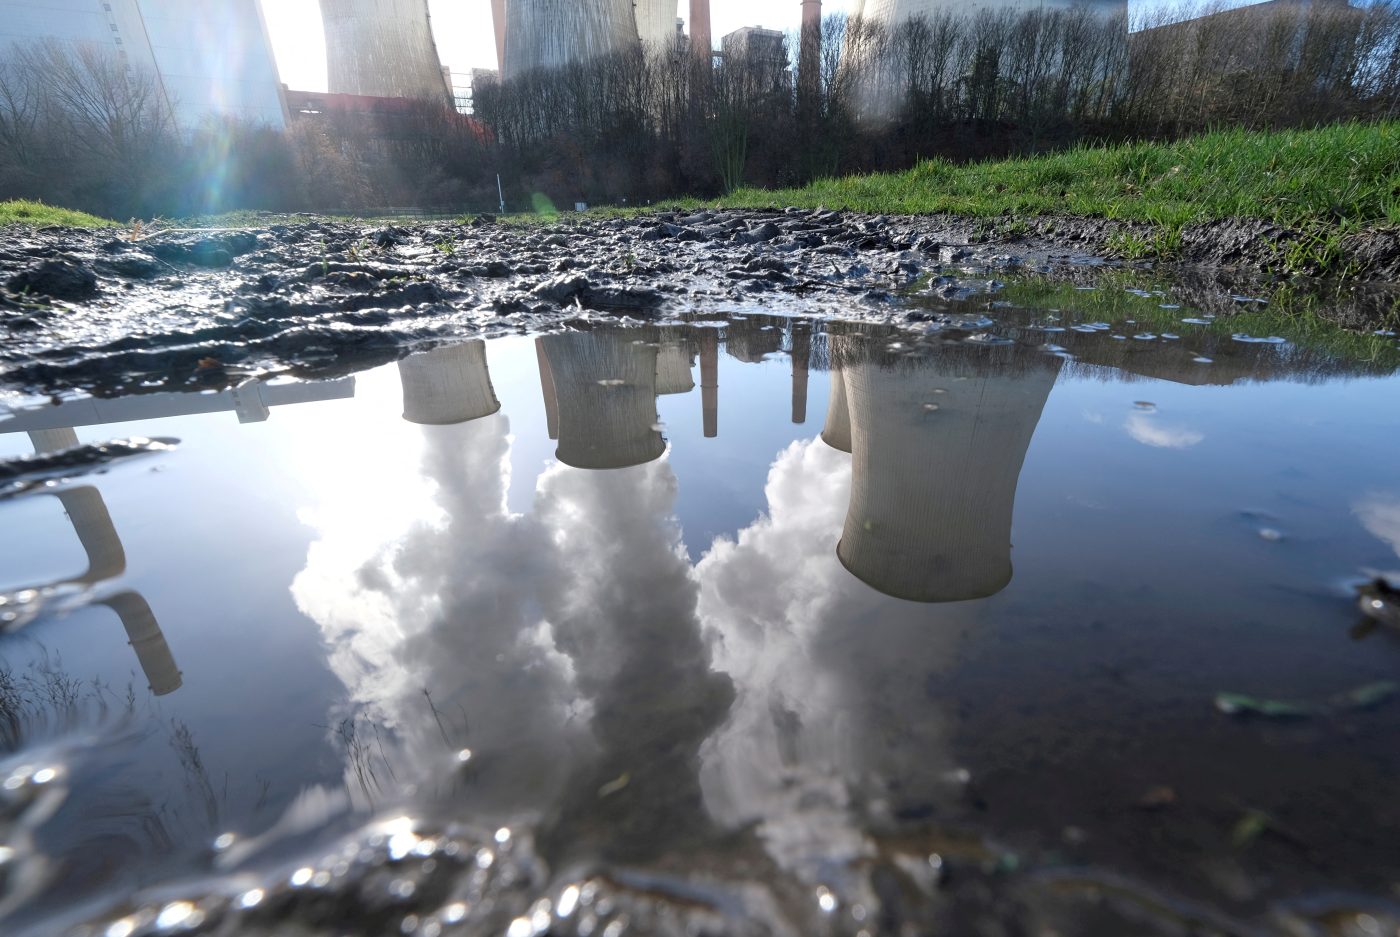 Photo: The lignite (brown coal) power plant complex of German energy supplier and utility RWE is reflected in a puddle in Neurath, north-west of Cologne, Germany, February 5, 2020. Credit: REUTERS/Wolfgang Rattay//File Photo